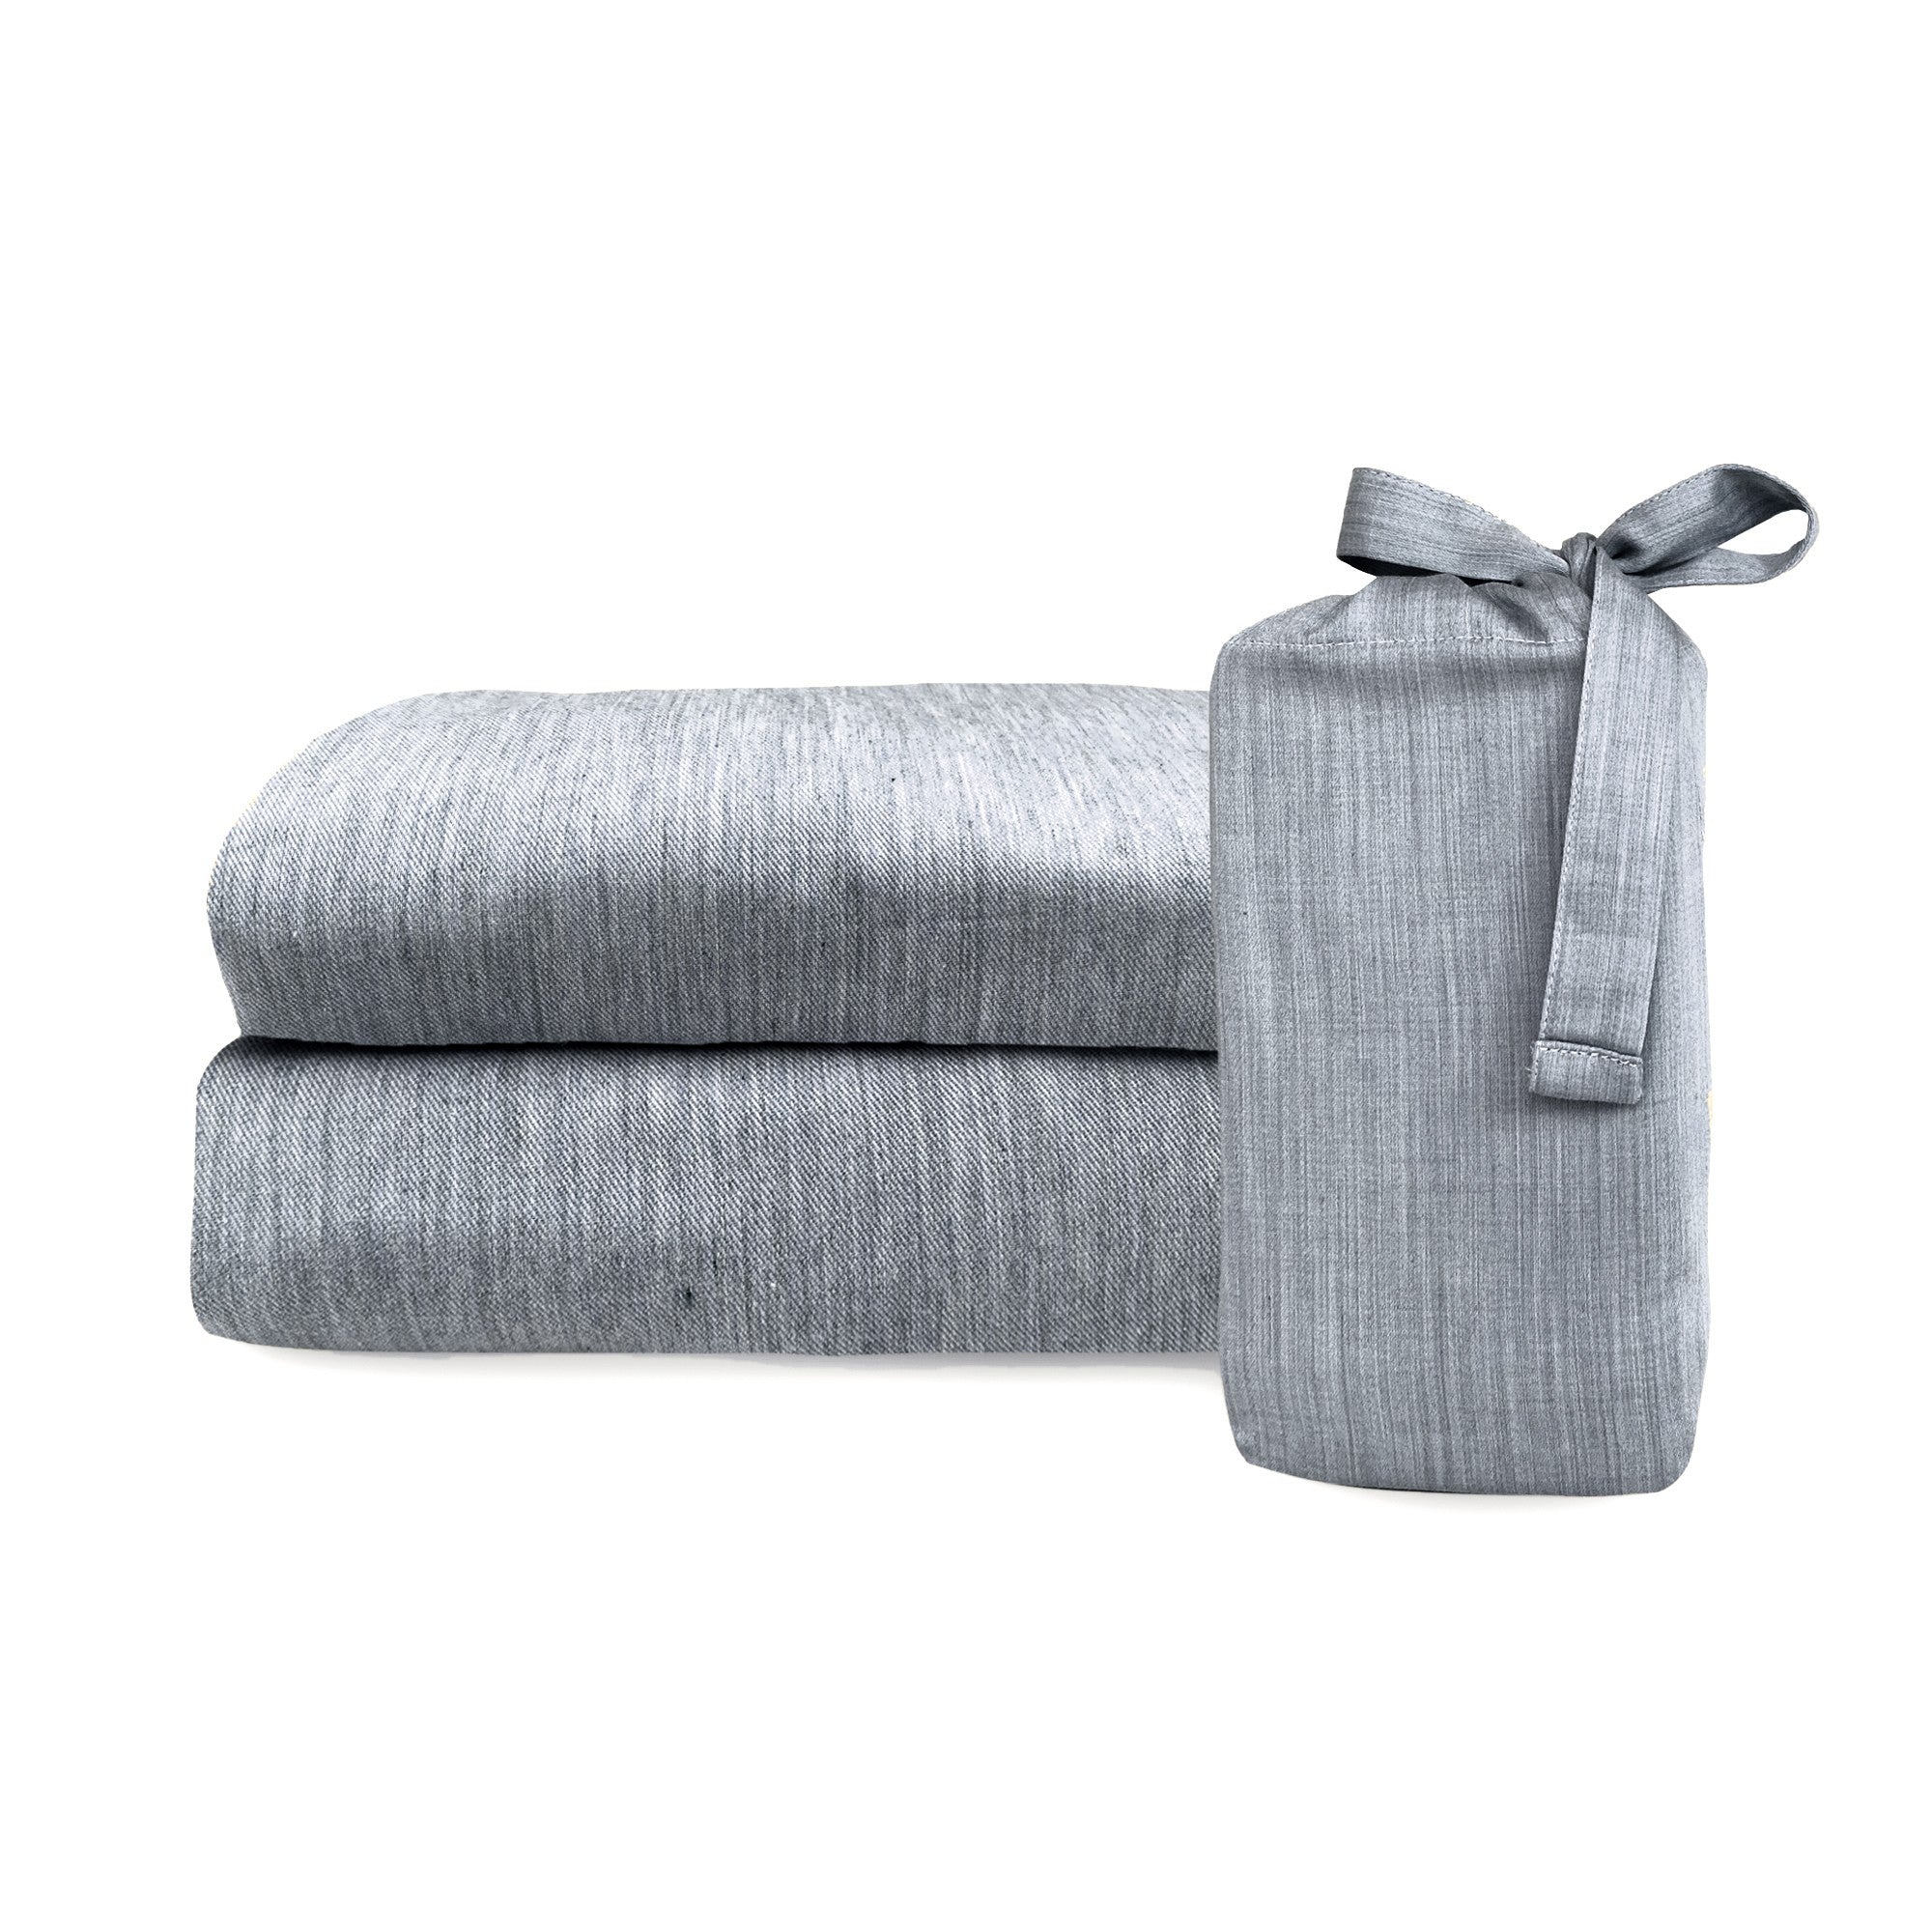 MELANGE Bamboo Pillowcase Sets - Rich, Cozy and Comfortable Pillow Cover Sets For Better Sleep - Silver